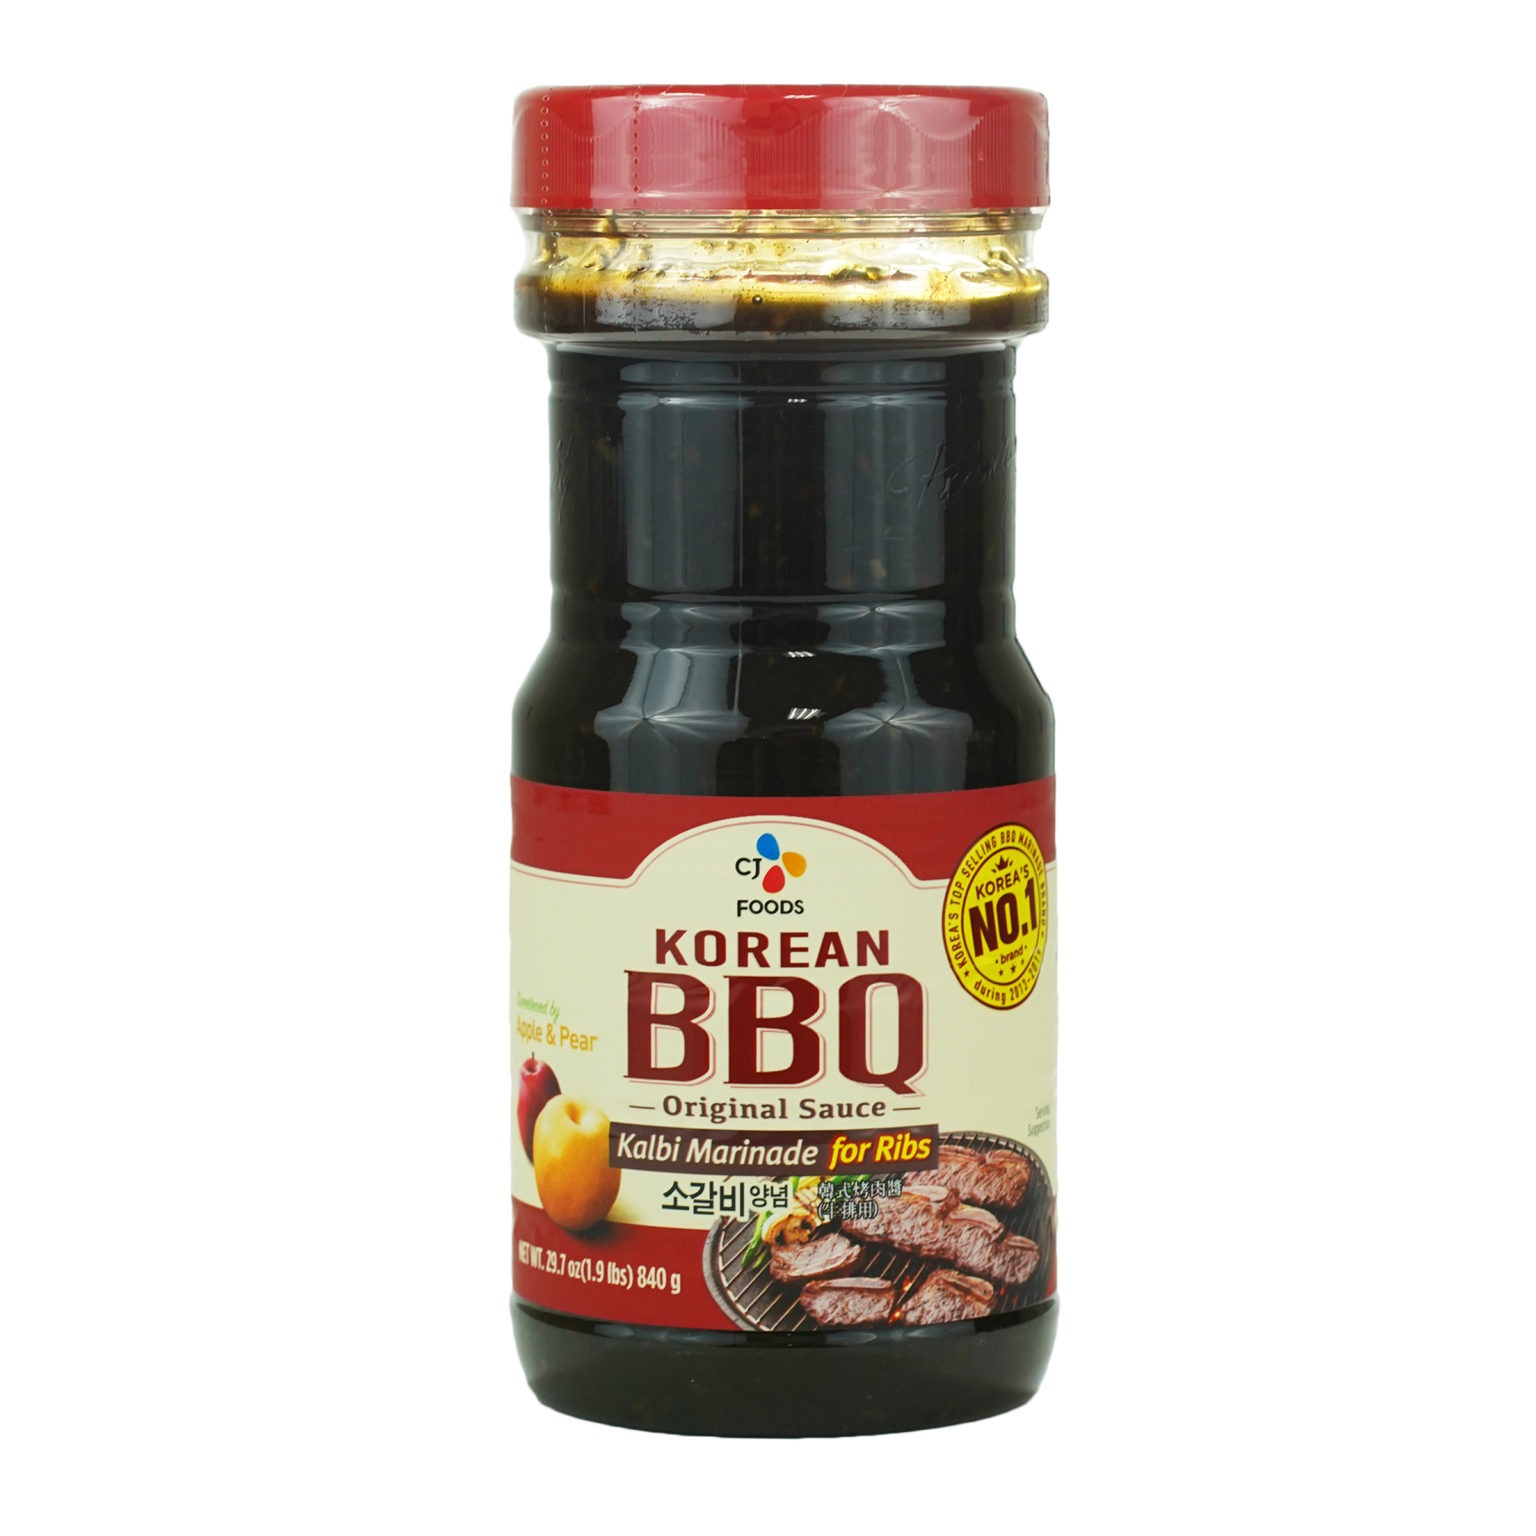 Don’t Miss Our 15 Most Shared Korean Bbq Sauce – Easy Recipes To Make ...